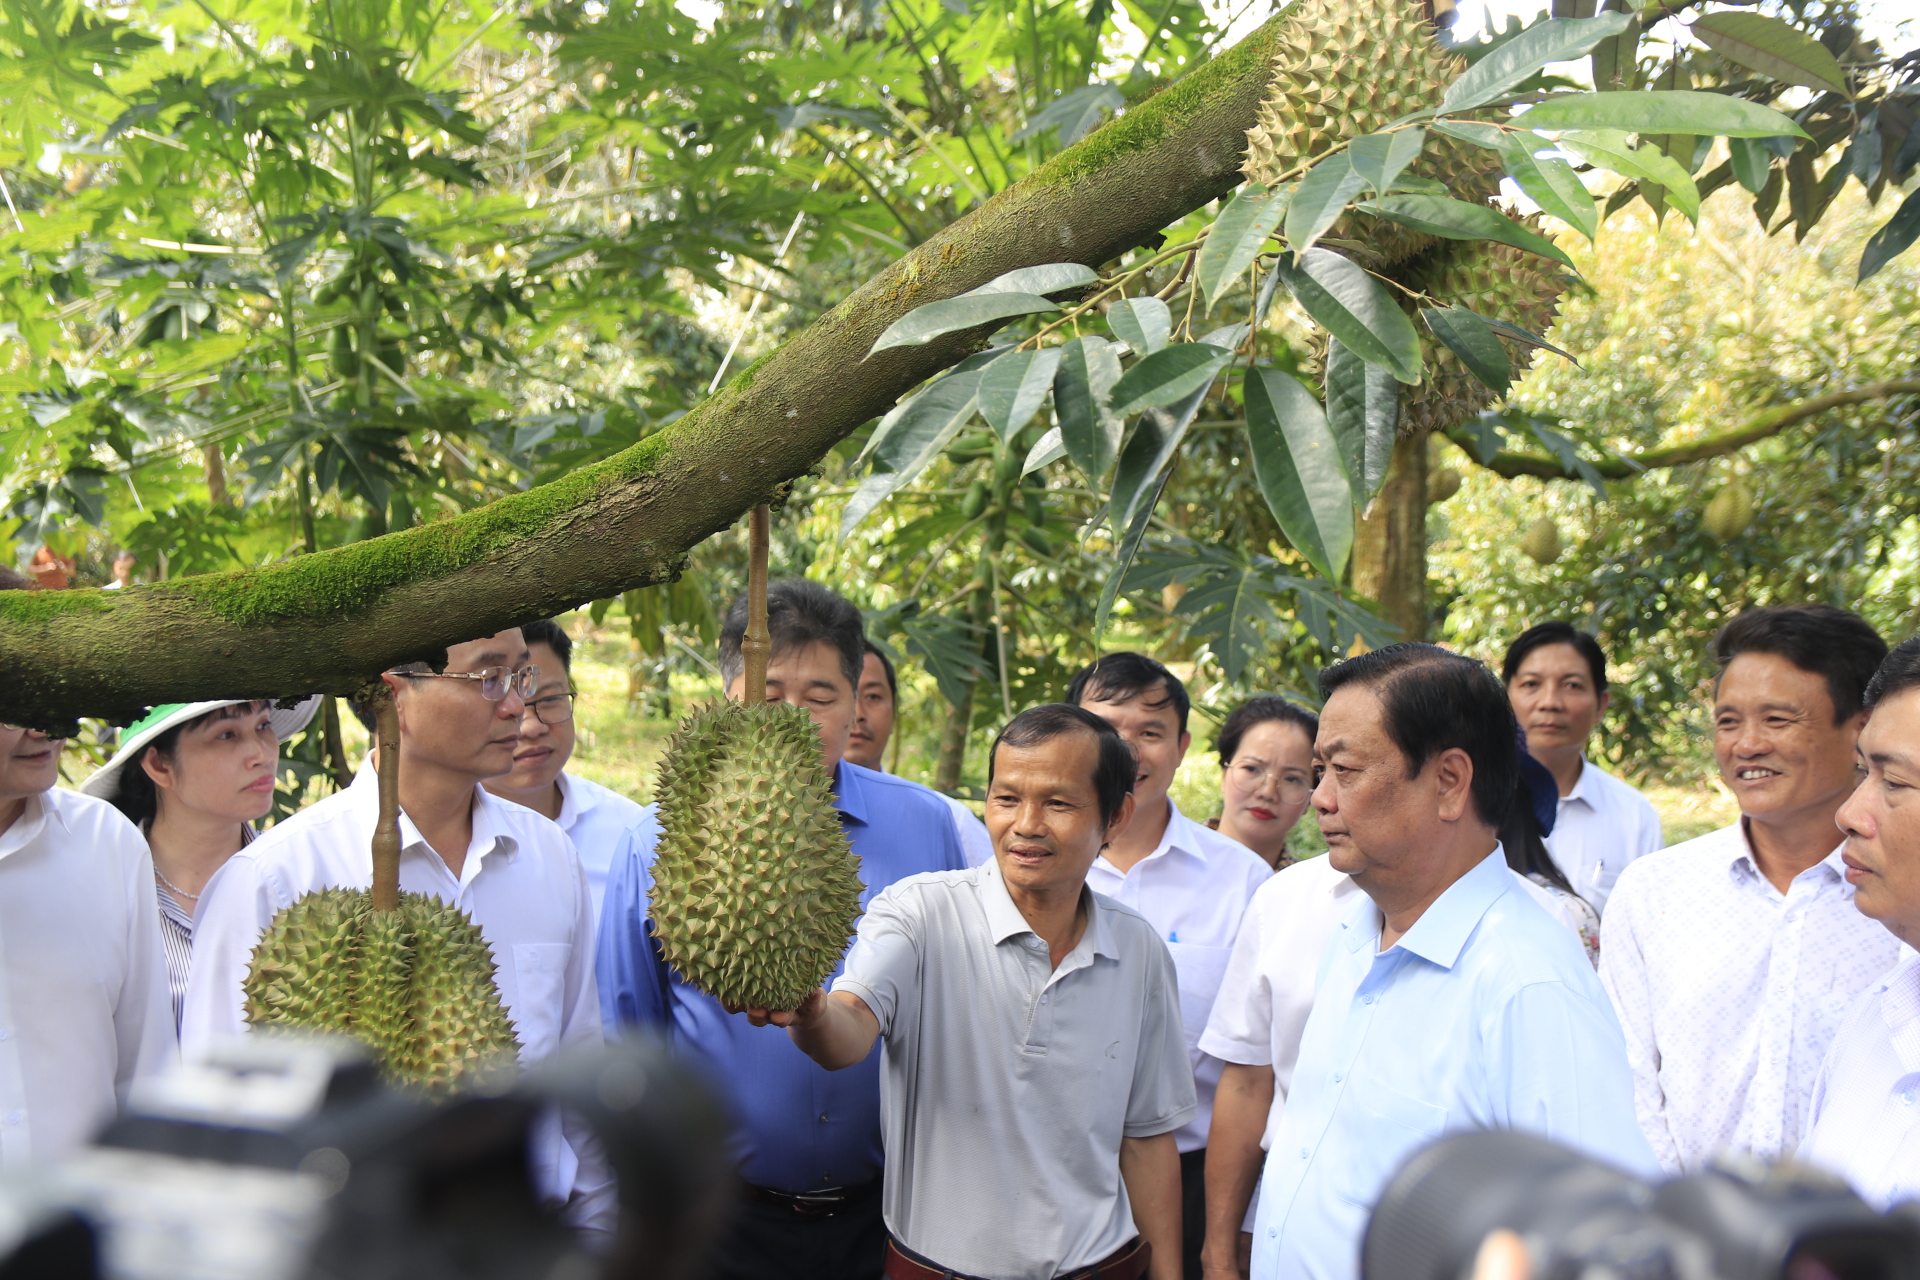 Minister of Agriculture and Rural Development Le Minh Hoan (R, 3rd) visits a durian farm in Dak Lak Province, Vietnam. Photo: The The / Tuoi Tre